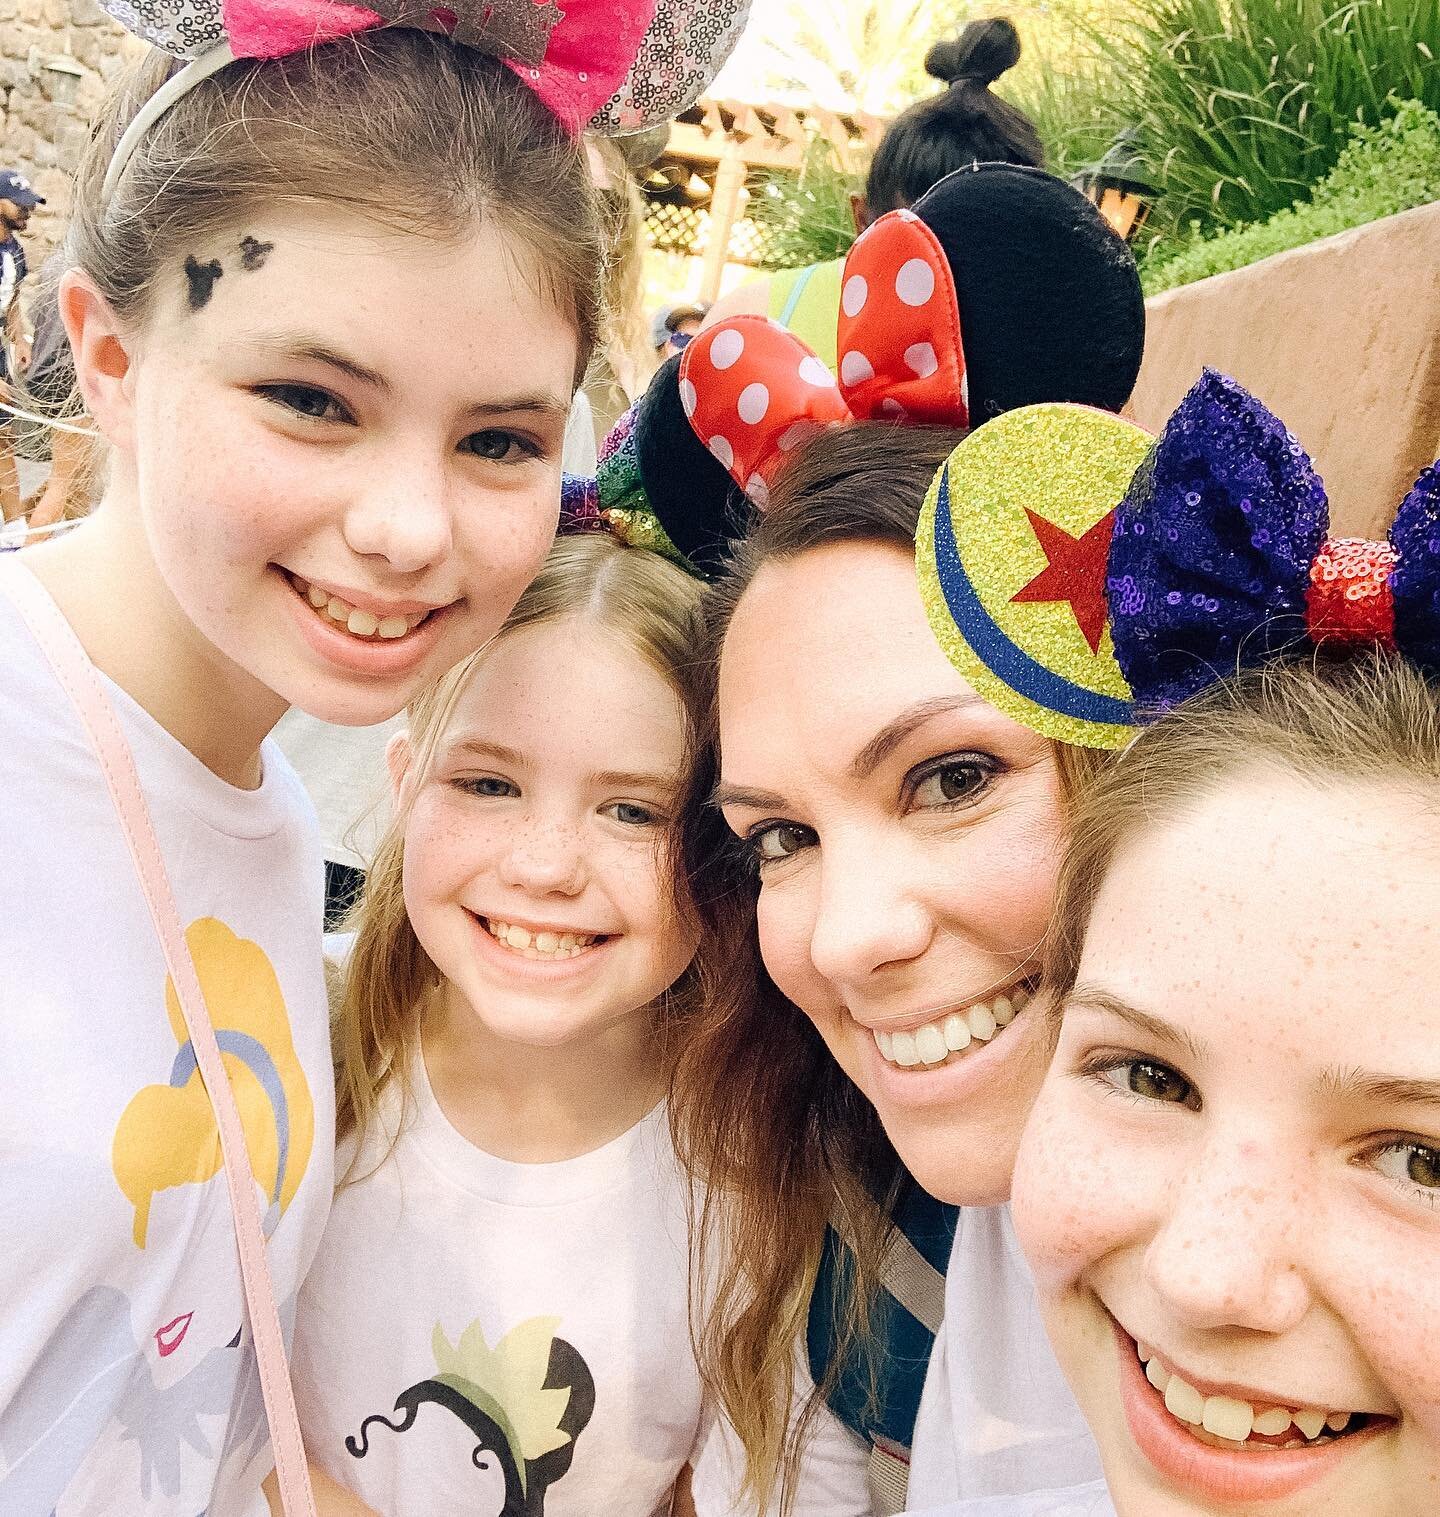 Me and my girls at Hollywood studios, having a blast! We&rsquo;re hitting up Disney world while my husband is working with a company here in Orlando. He&rsquo;ll join in on the fun on Saturday.